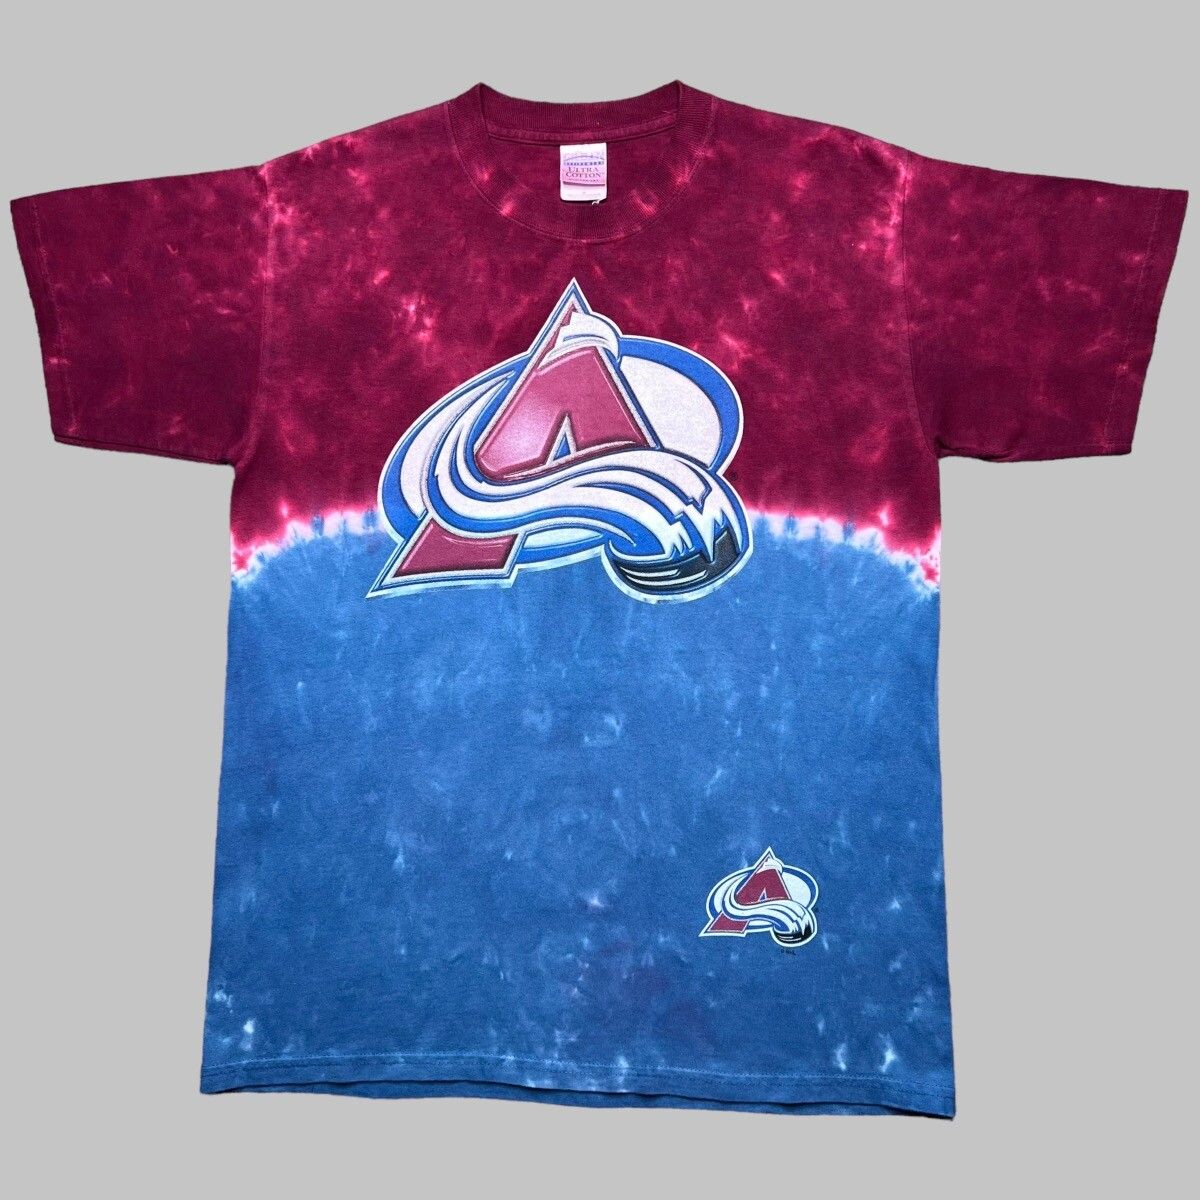 Vintage Vintage 1990s NHL Colorado Avalanche Tie Dye All Over Tee Size US M / EU 48-50 / 2 - 1 Preview